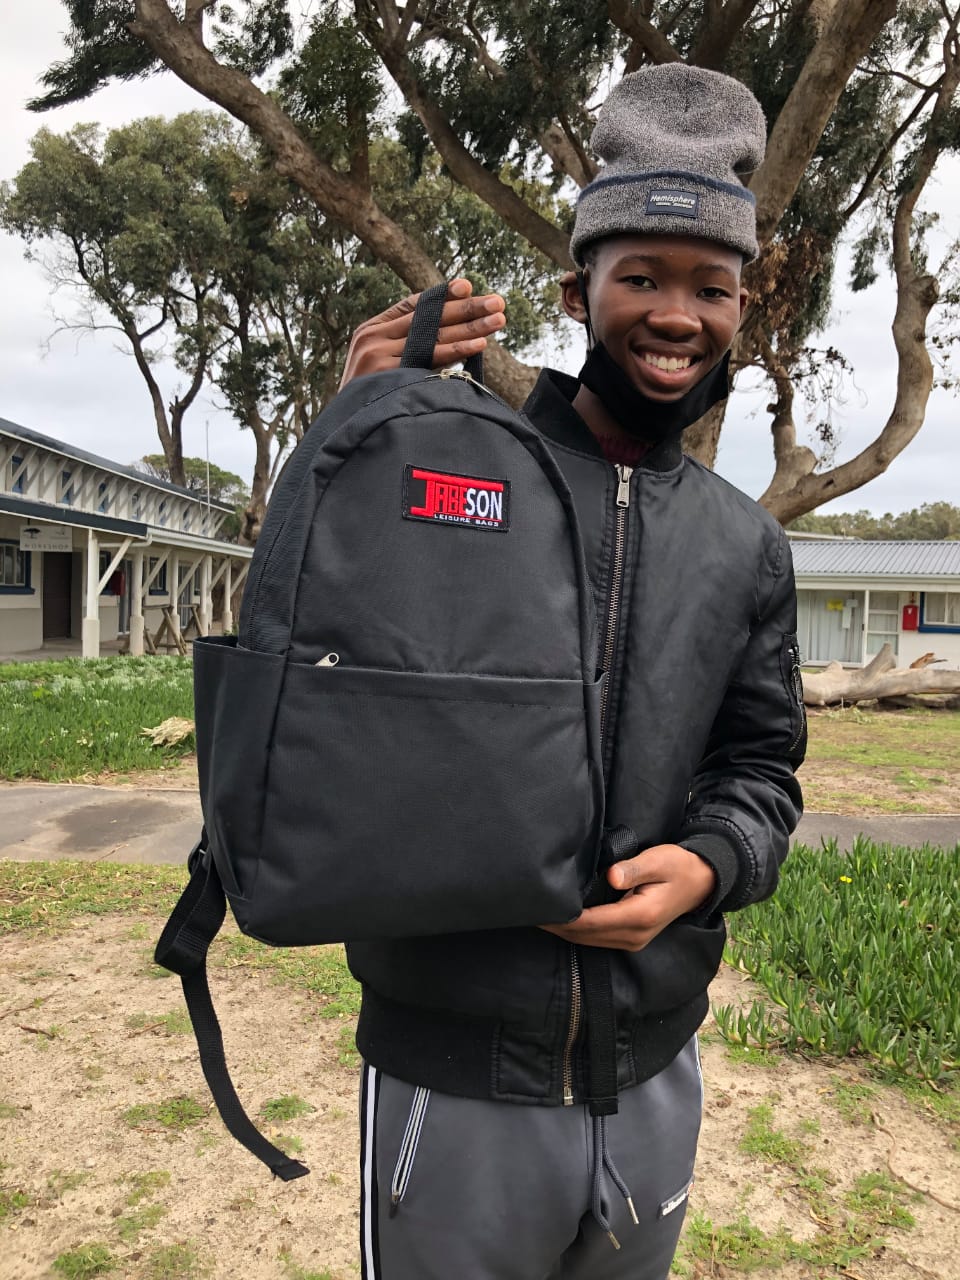 African Boy holding a bag smiling